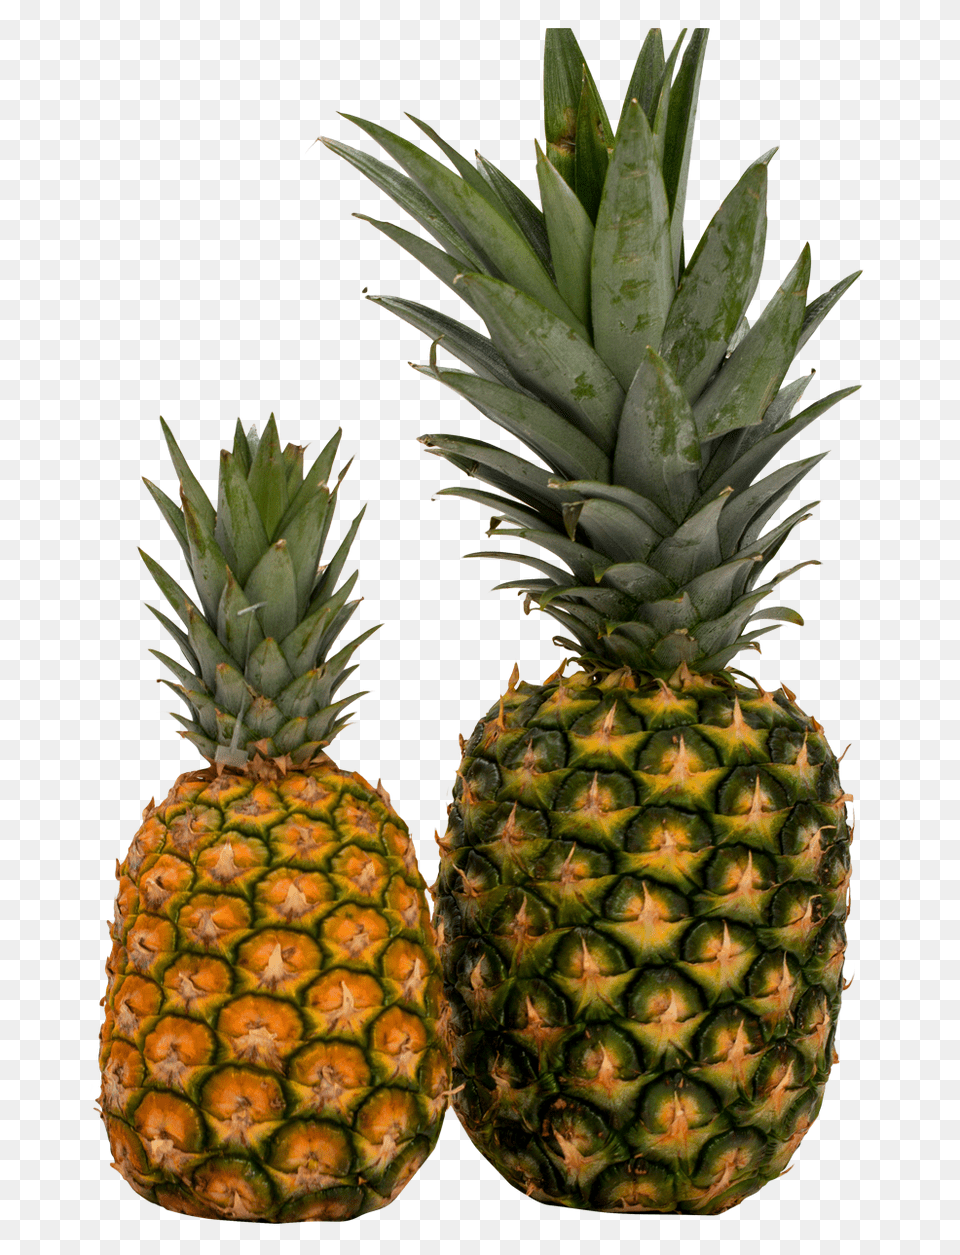 Two Pineapple Image, Food, Fruit, Plant, Produce Png